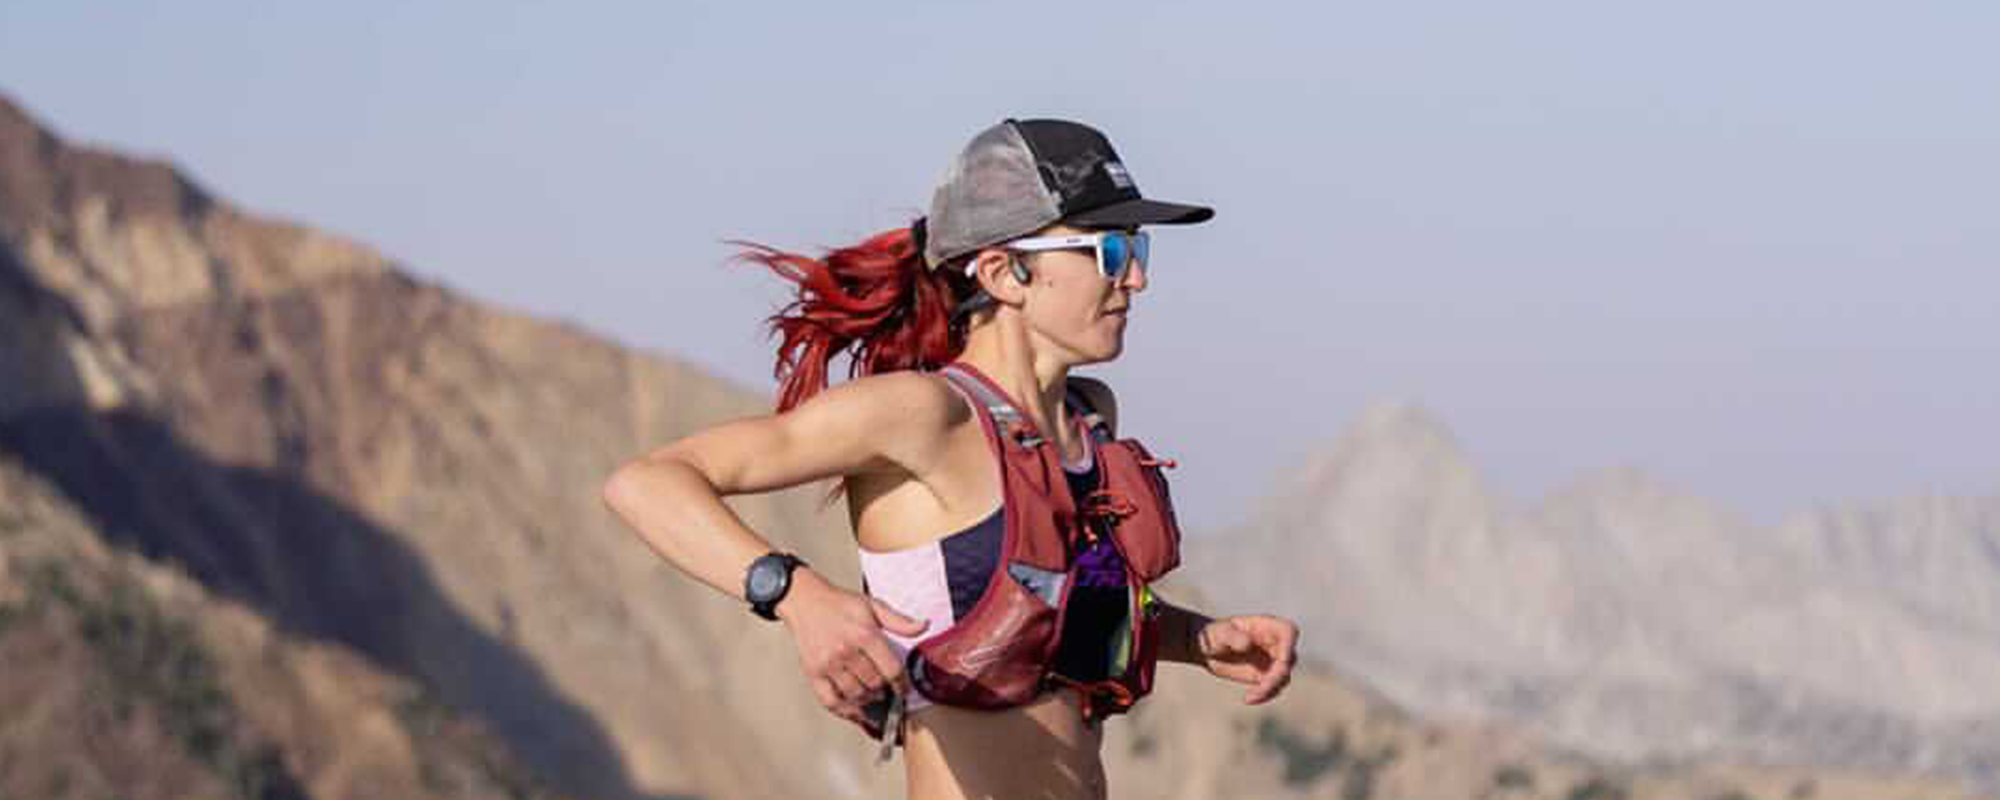 Professional Trail Runner & Coach Amanda Basham running with weighted vest down mountainside wearing OpenRun Pro open-ear headphones